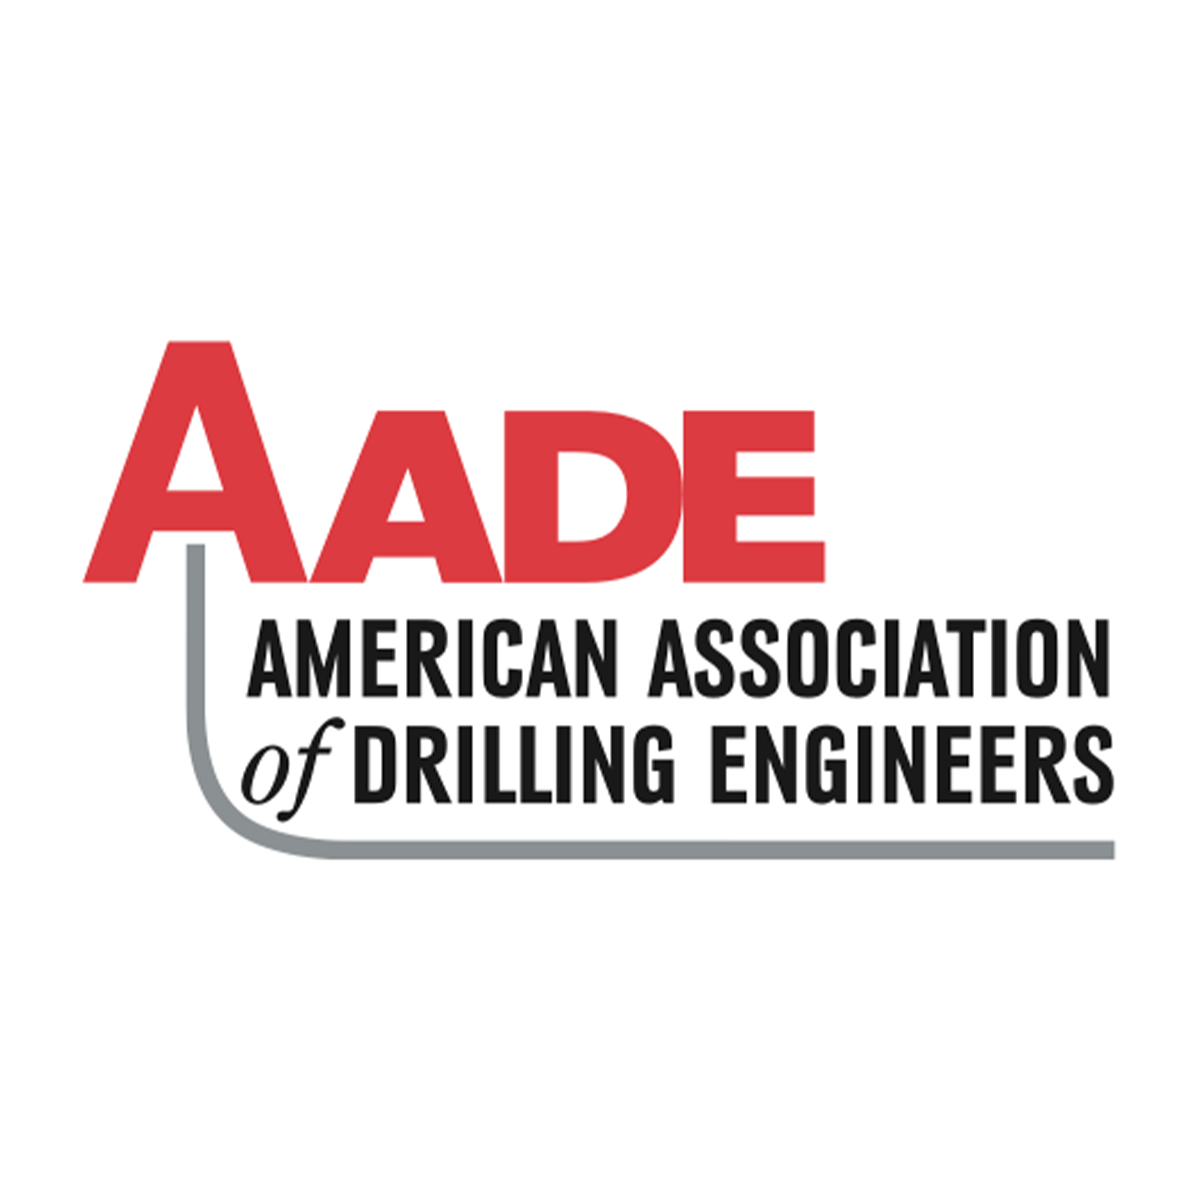 American Association of Drilling Engineers (AADE) 